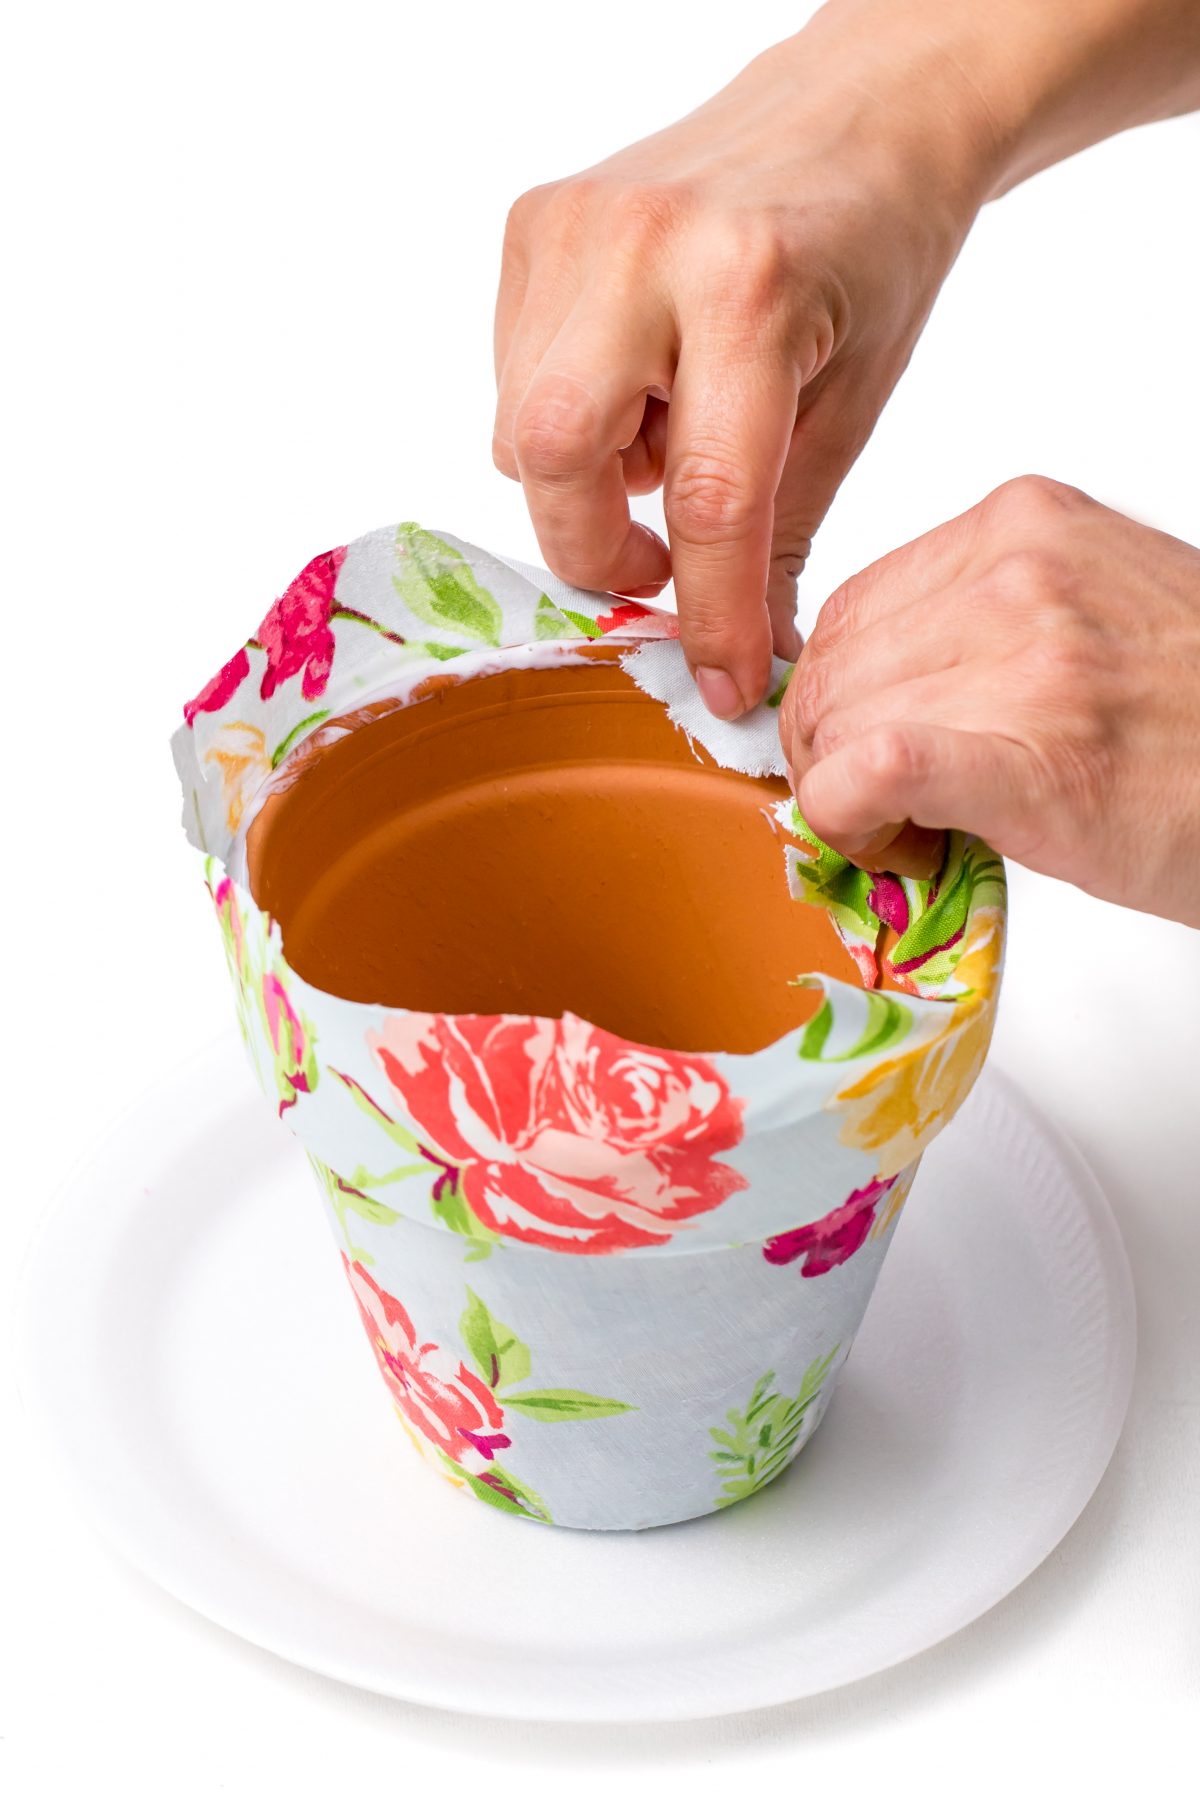 Fabric Covered Flower Pot - firmly pressing fabric to inside of terracotta pot